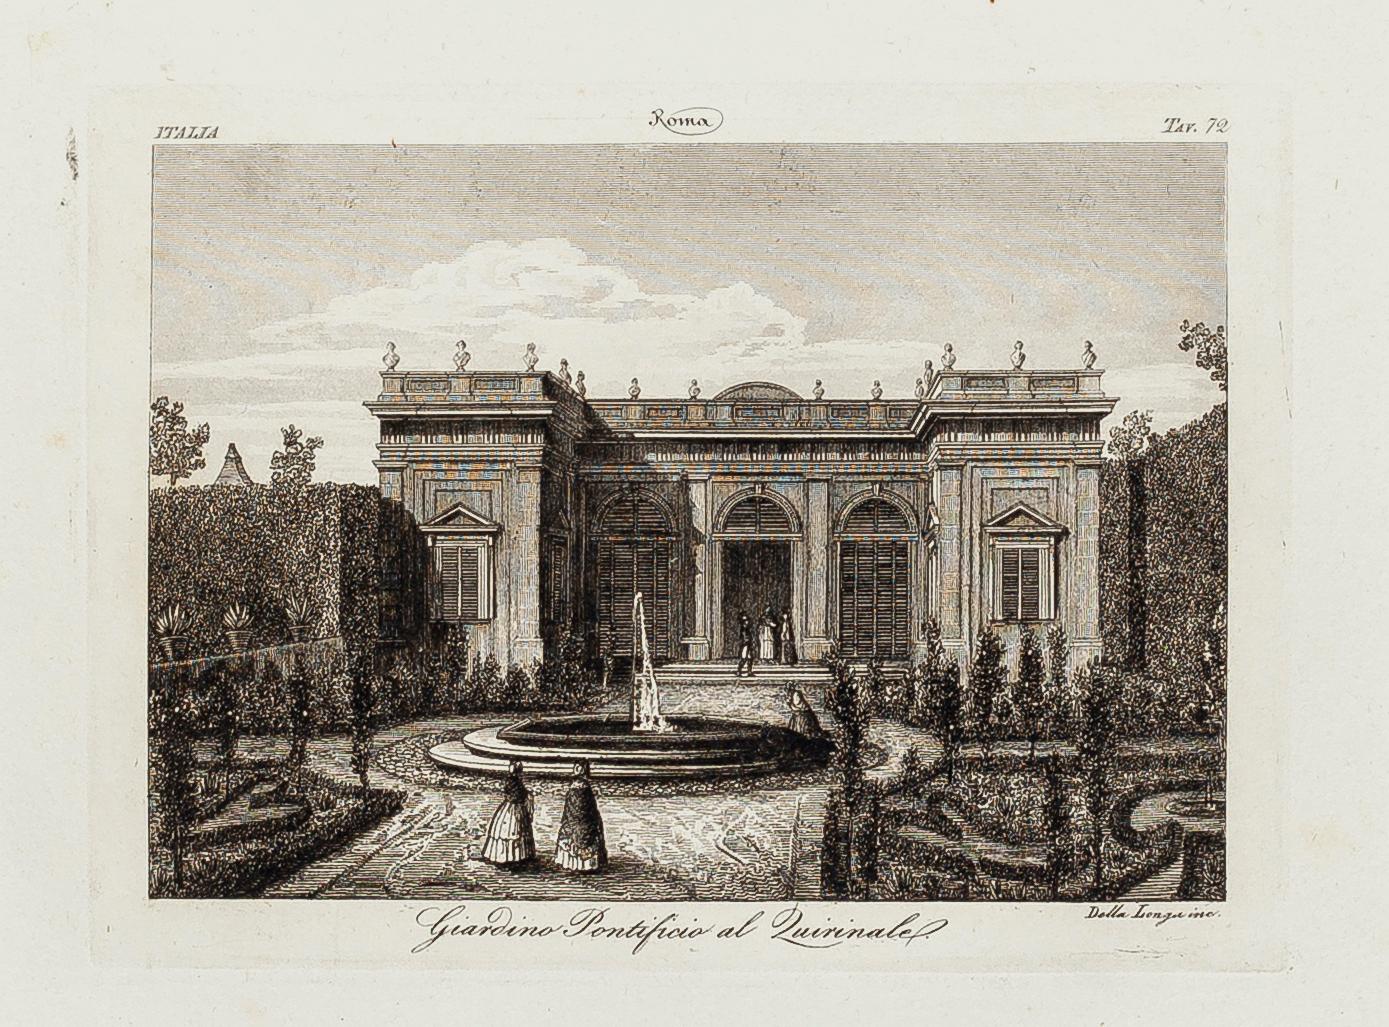 View of Quirinale Garden, Rome - Etching on Paper - 19th century - Print by Unknown